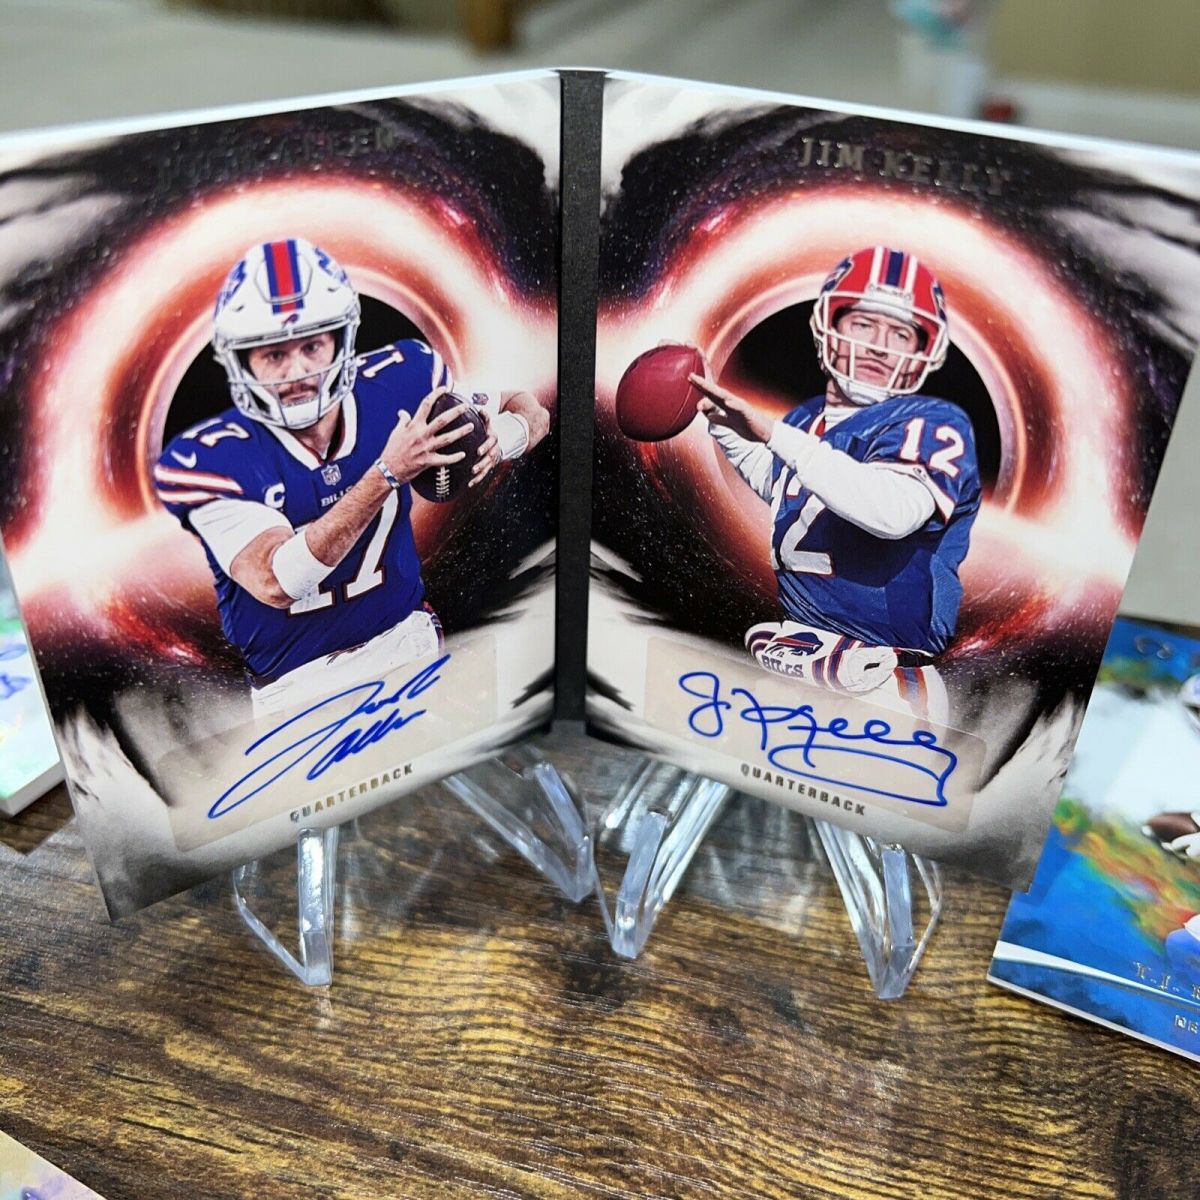 2021 Panini Origins of Greatness booklet-style auto card featuring Bills stars Josh Allen and Jim Kelly.